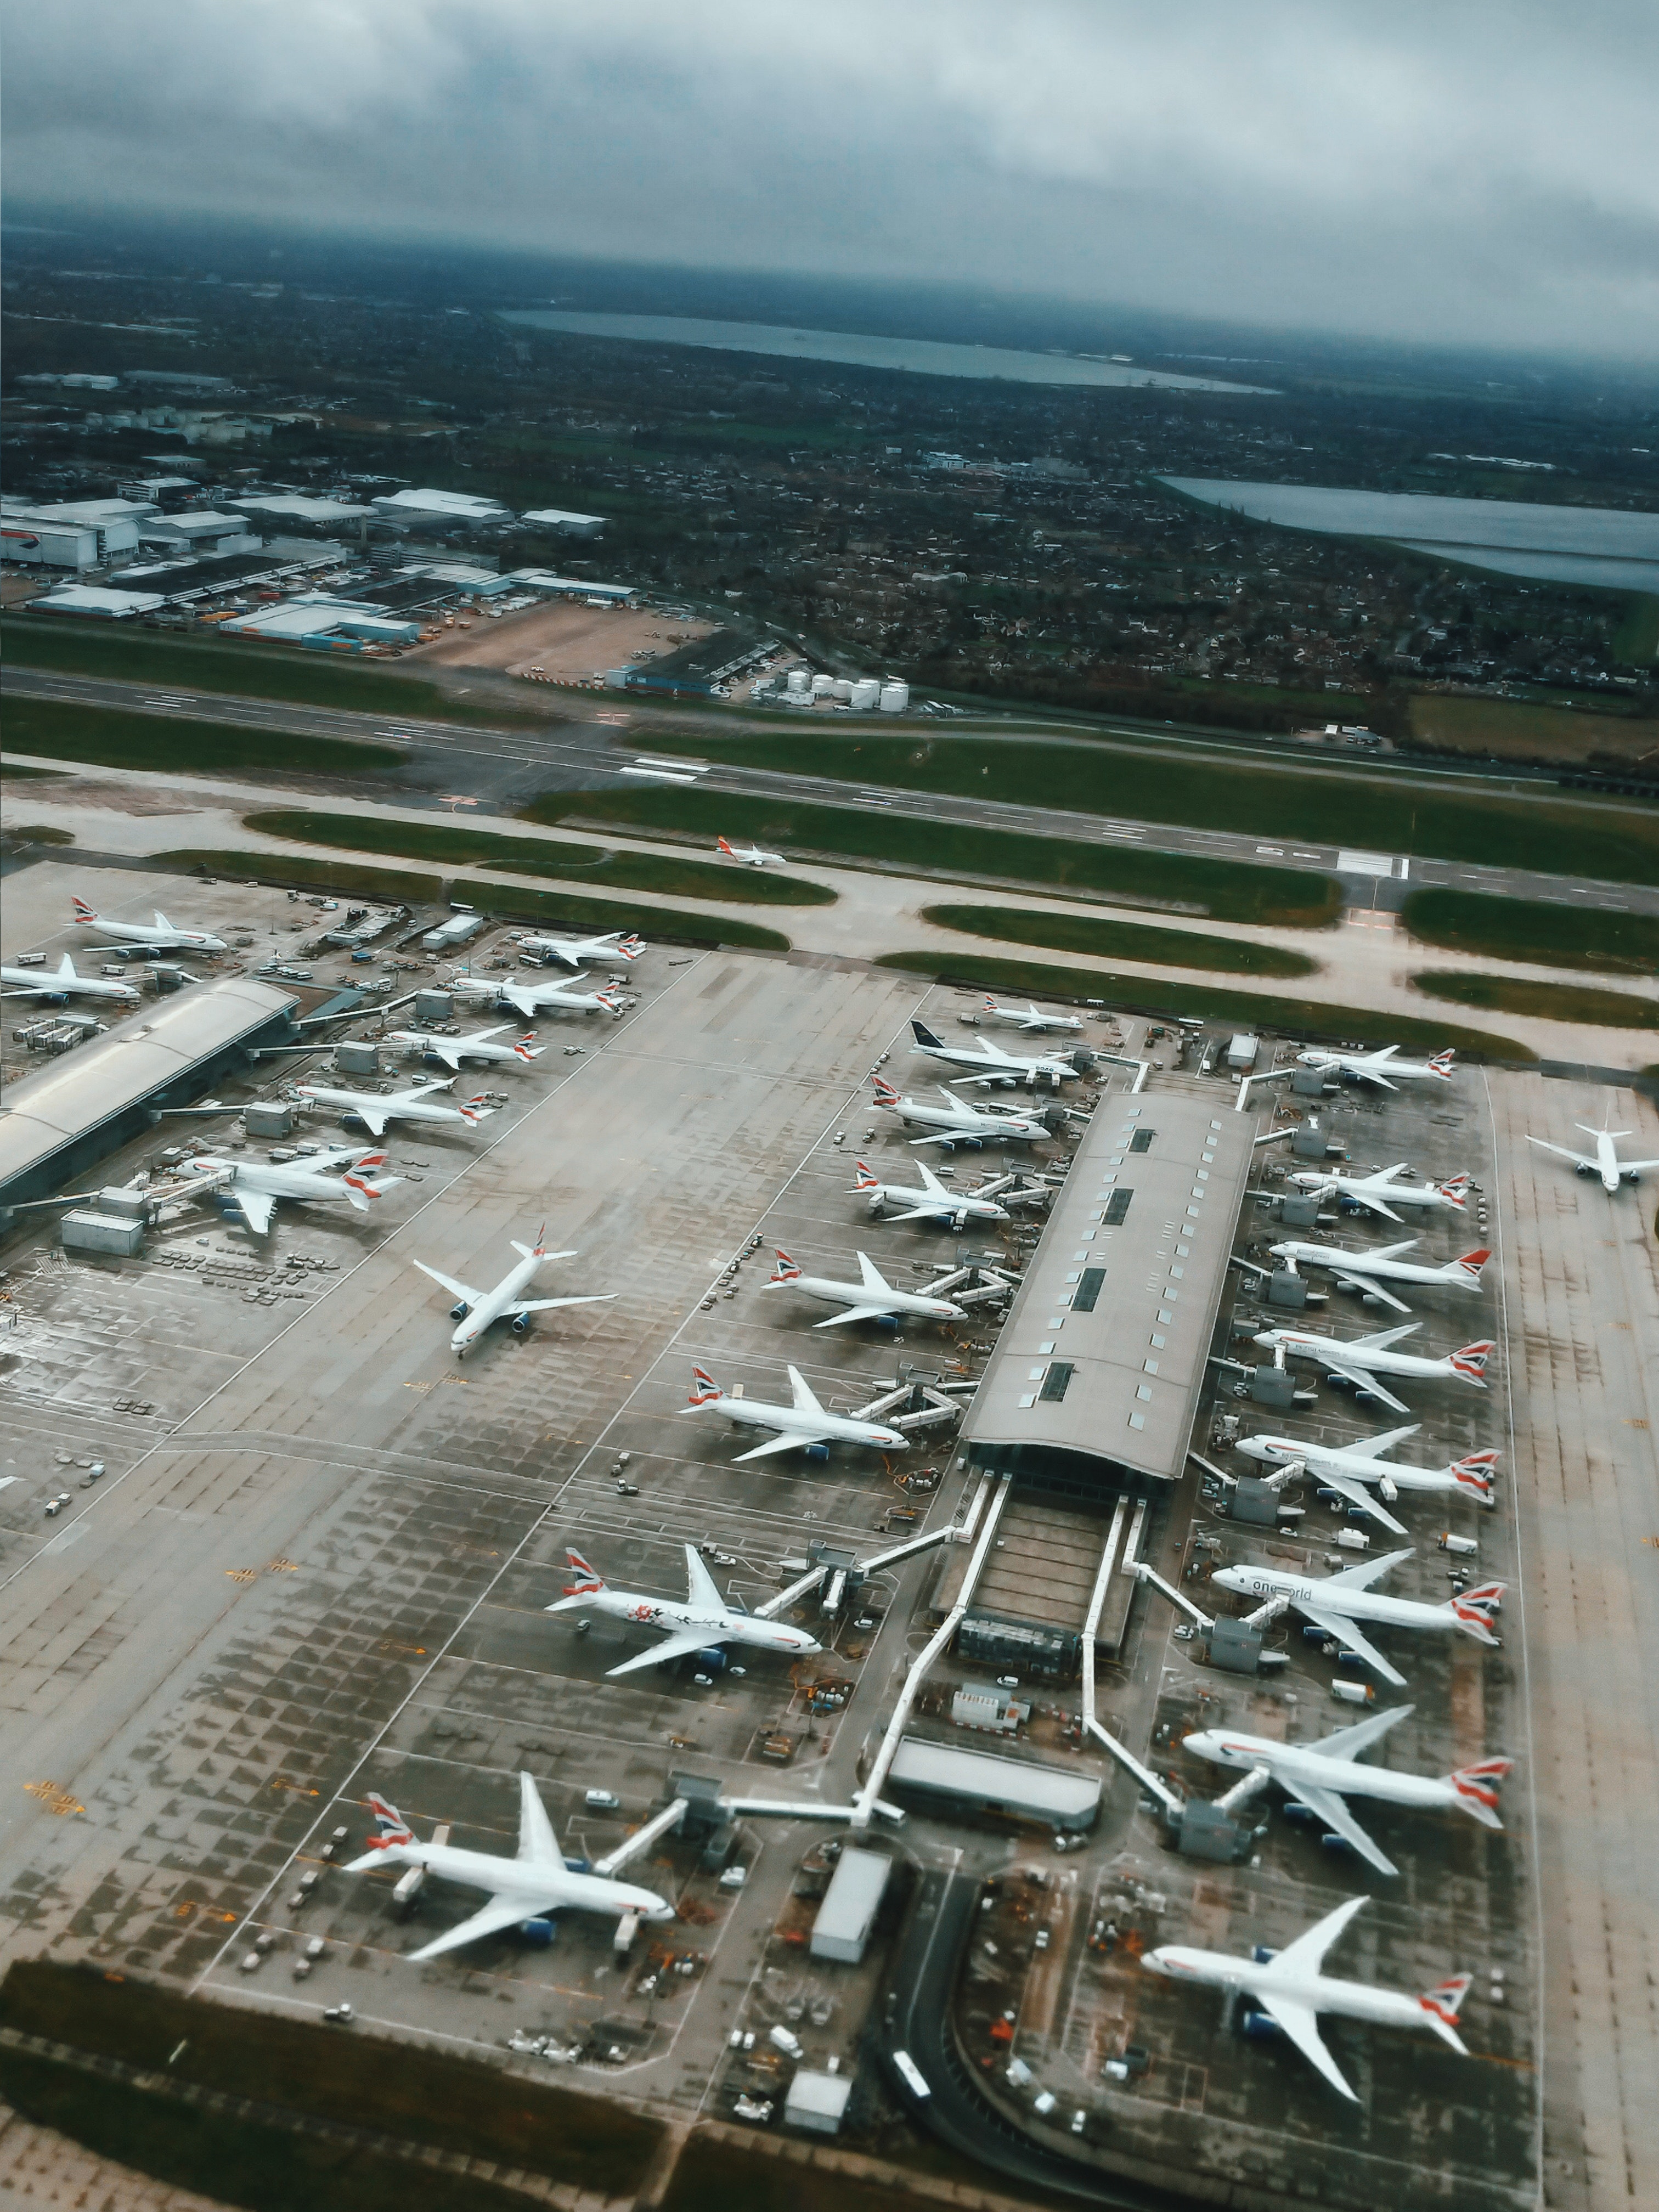 Easier said than done?: decarbonising our airports